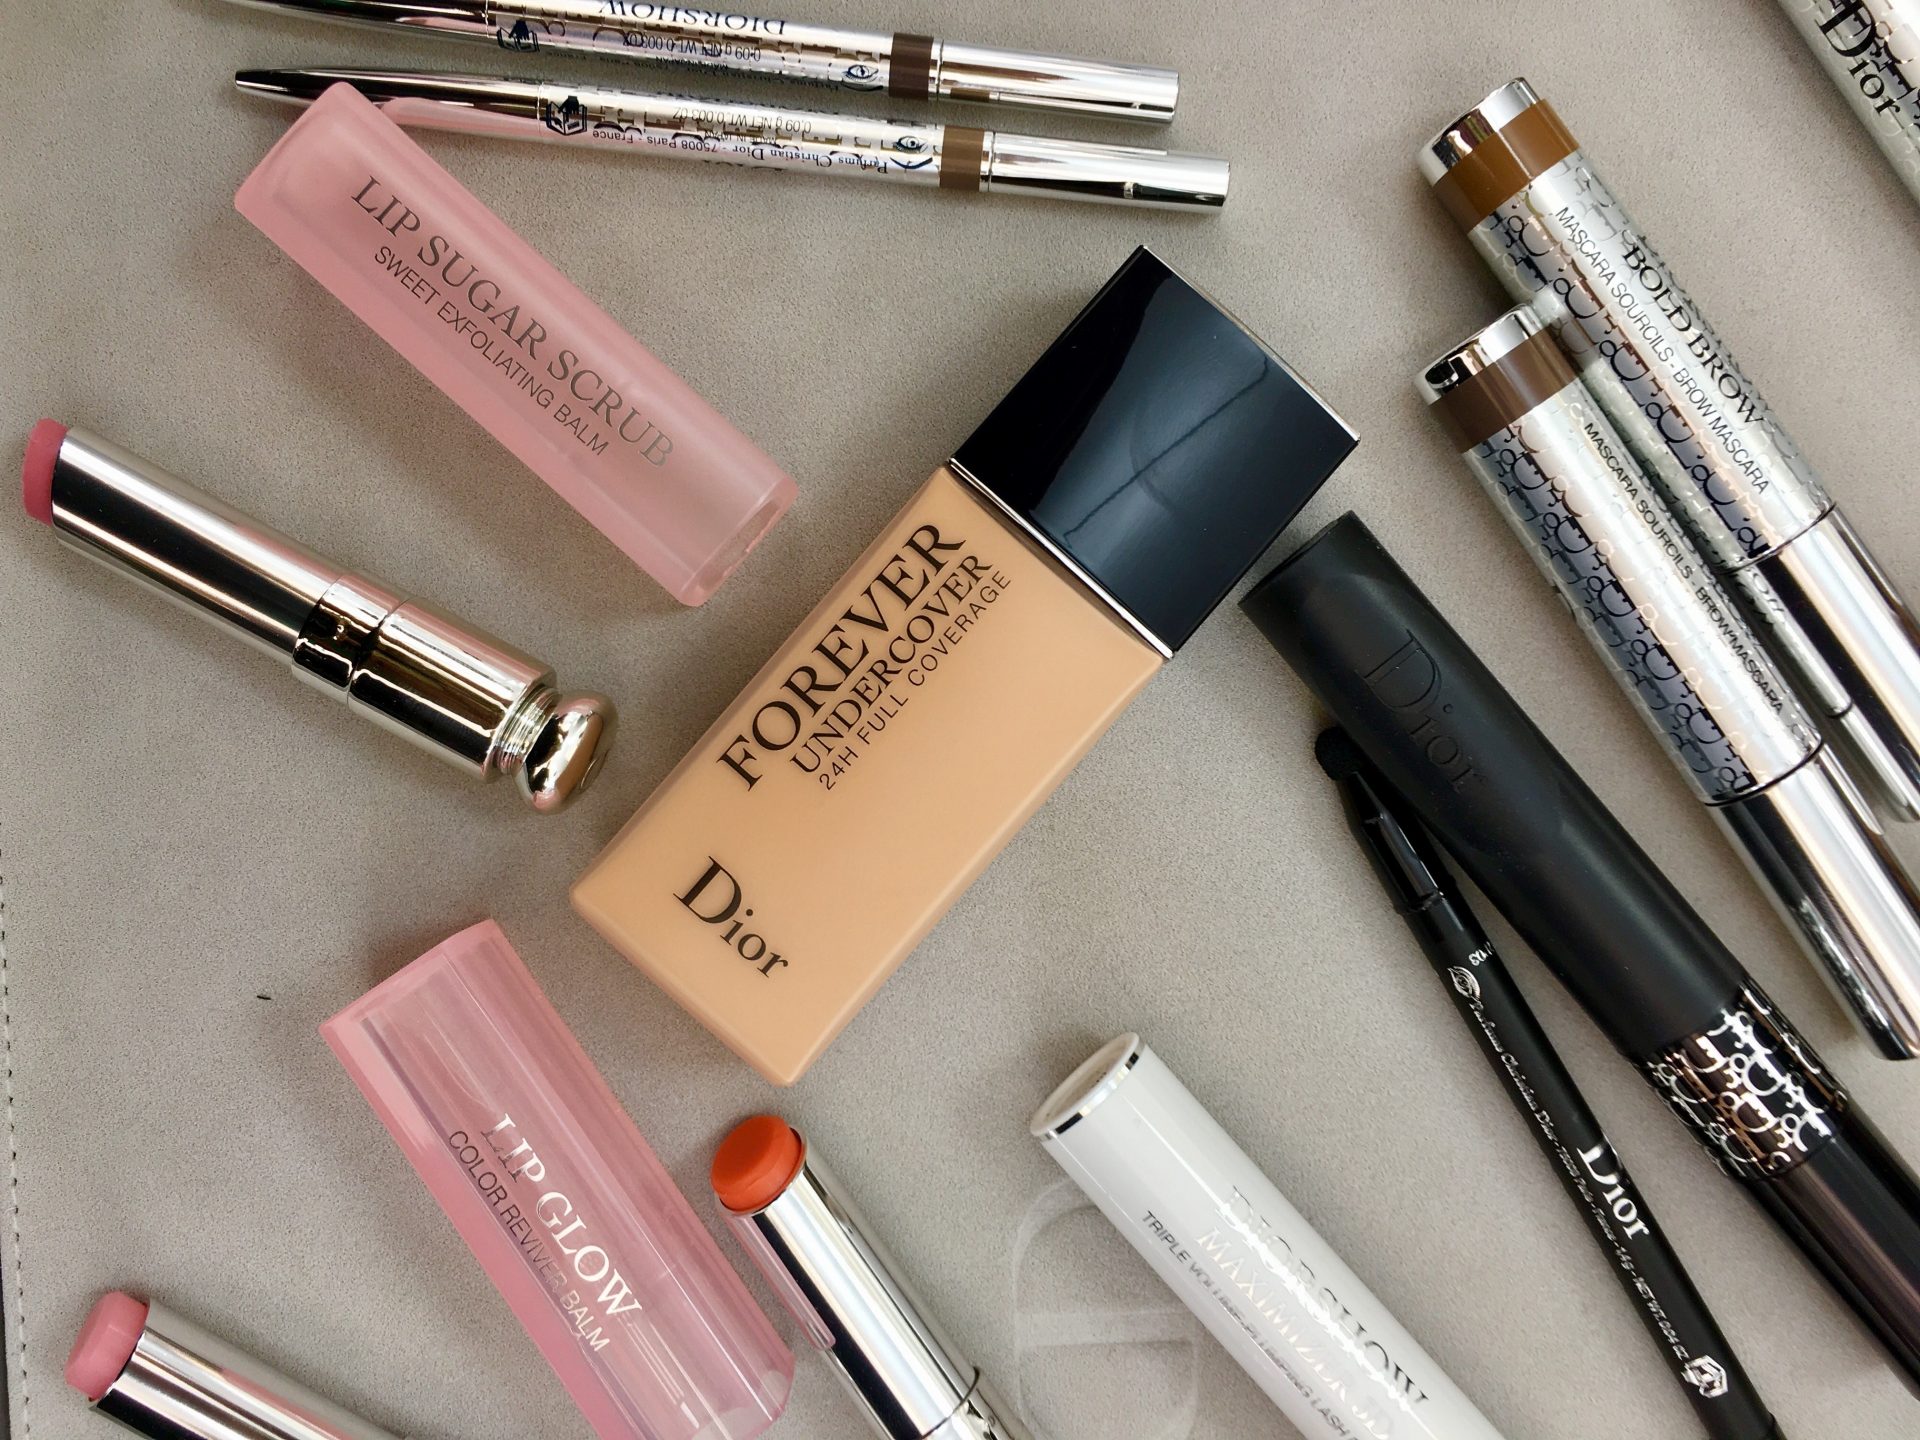 How to achieve the perfect camouflage? Try out Diorskin Forever Undercover foundation by Dior!